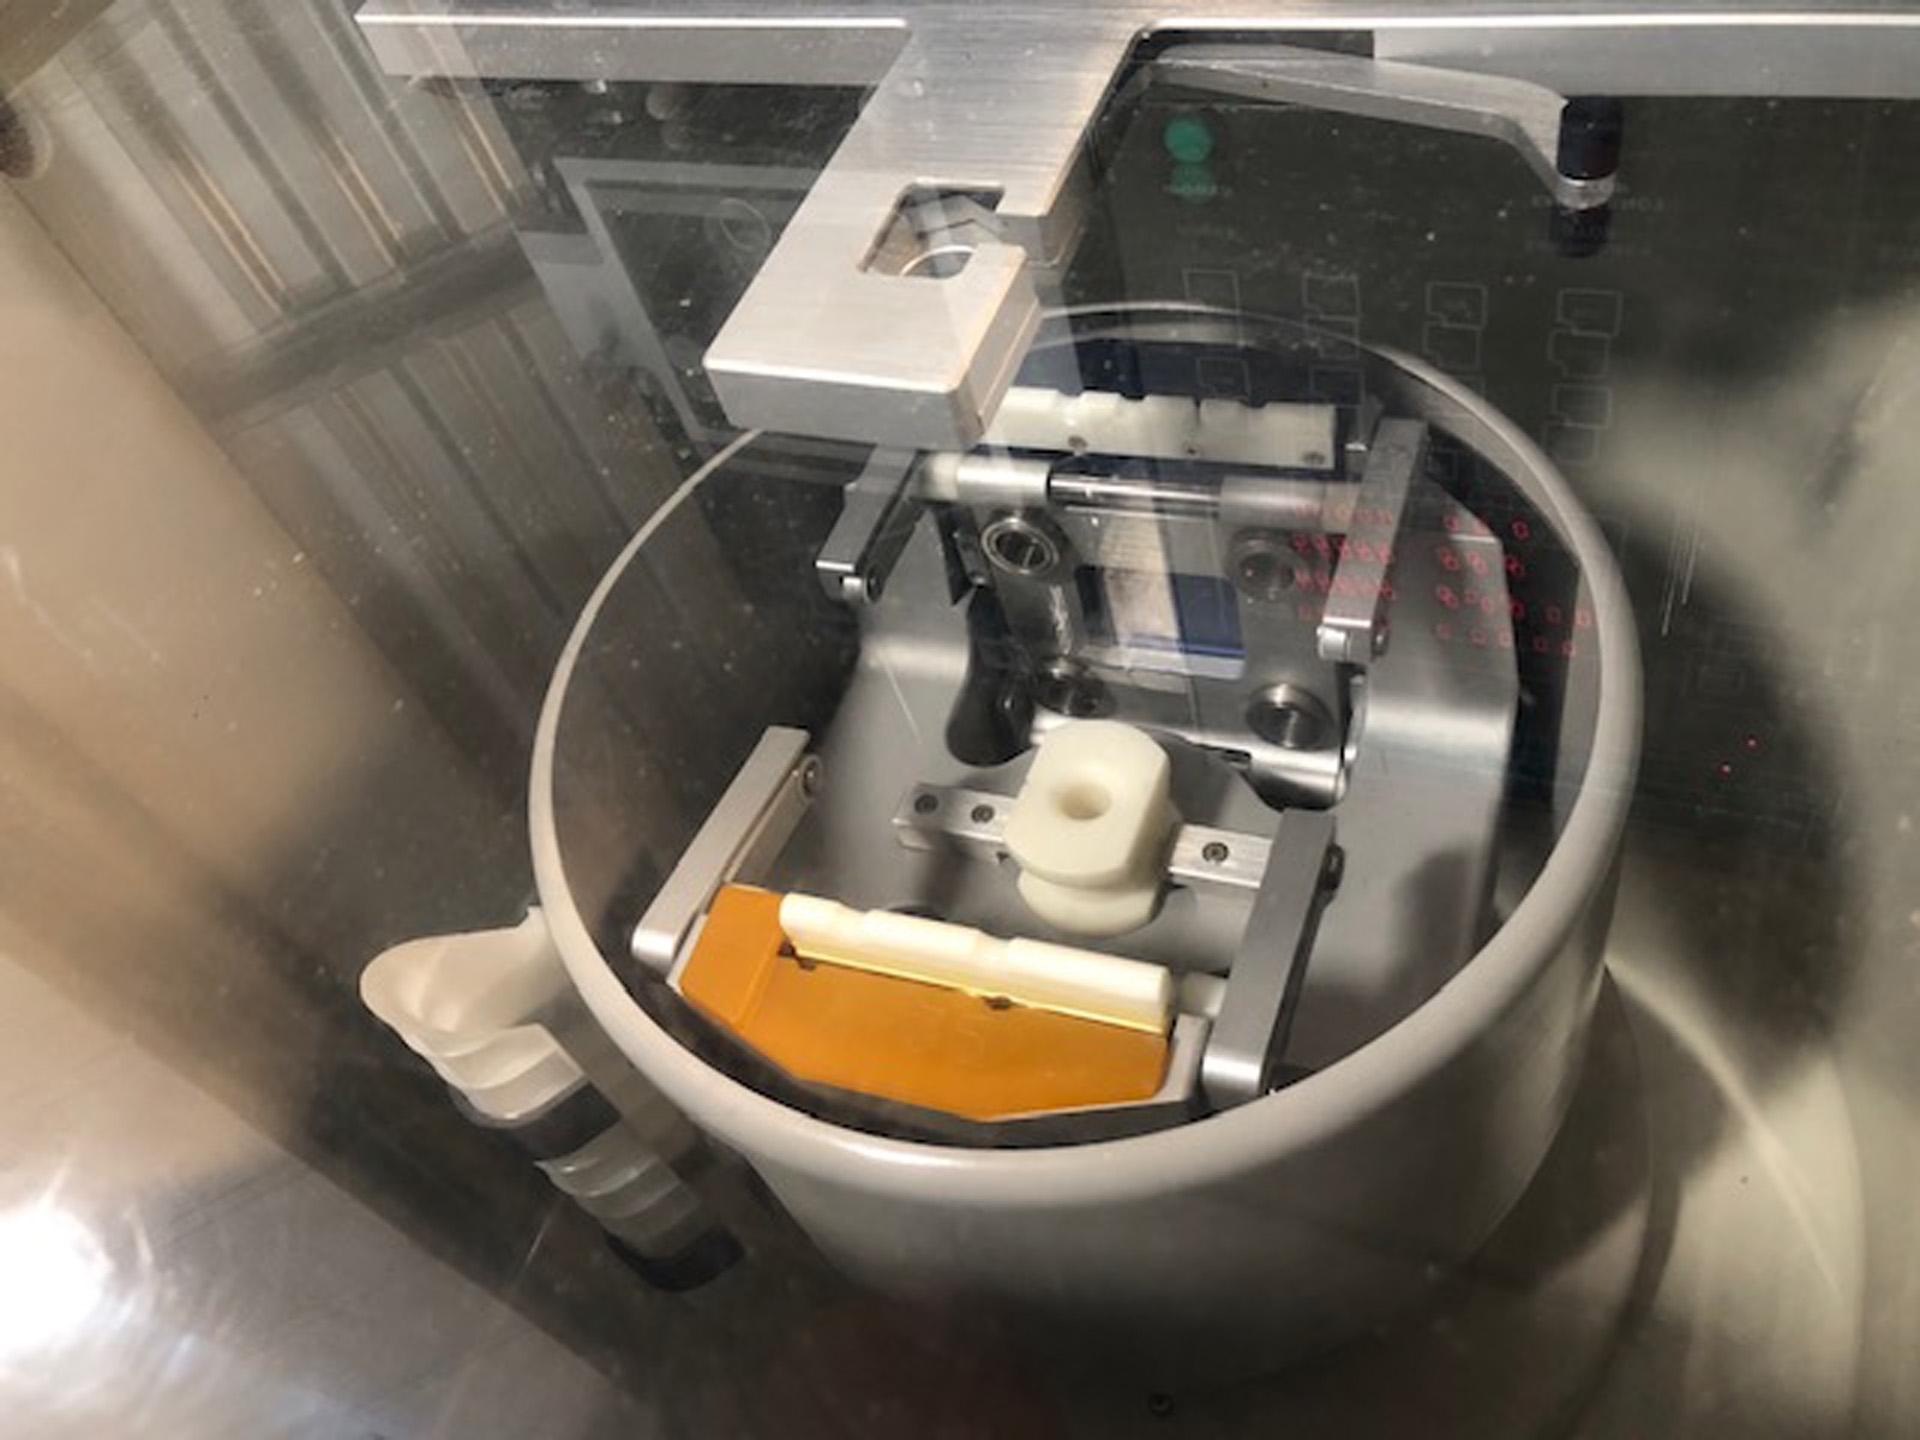 BAXTER CS 3000 Lab Equipment used for sale price #9245419 > buy from CAE